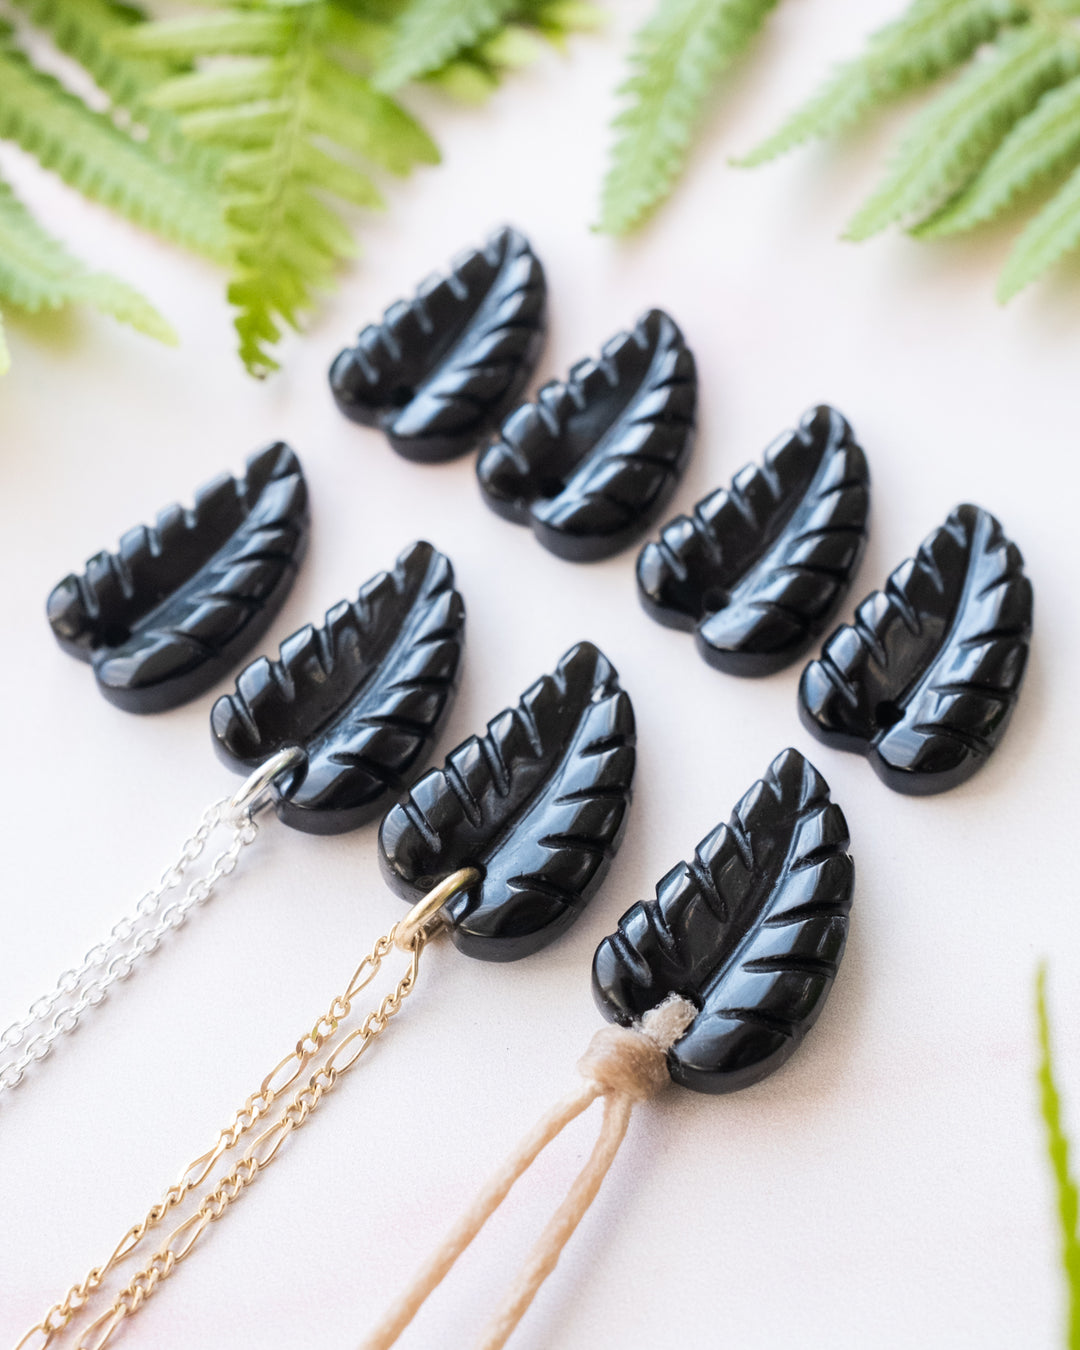 Obsidian Hand Carved Leaf Necklace - The Healing Pear